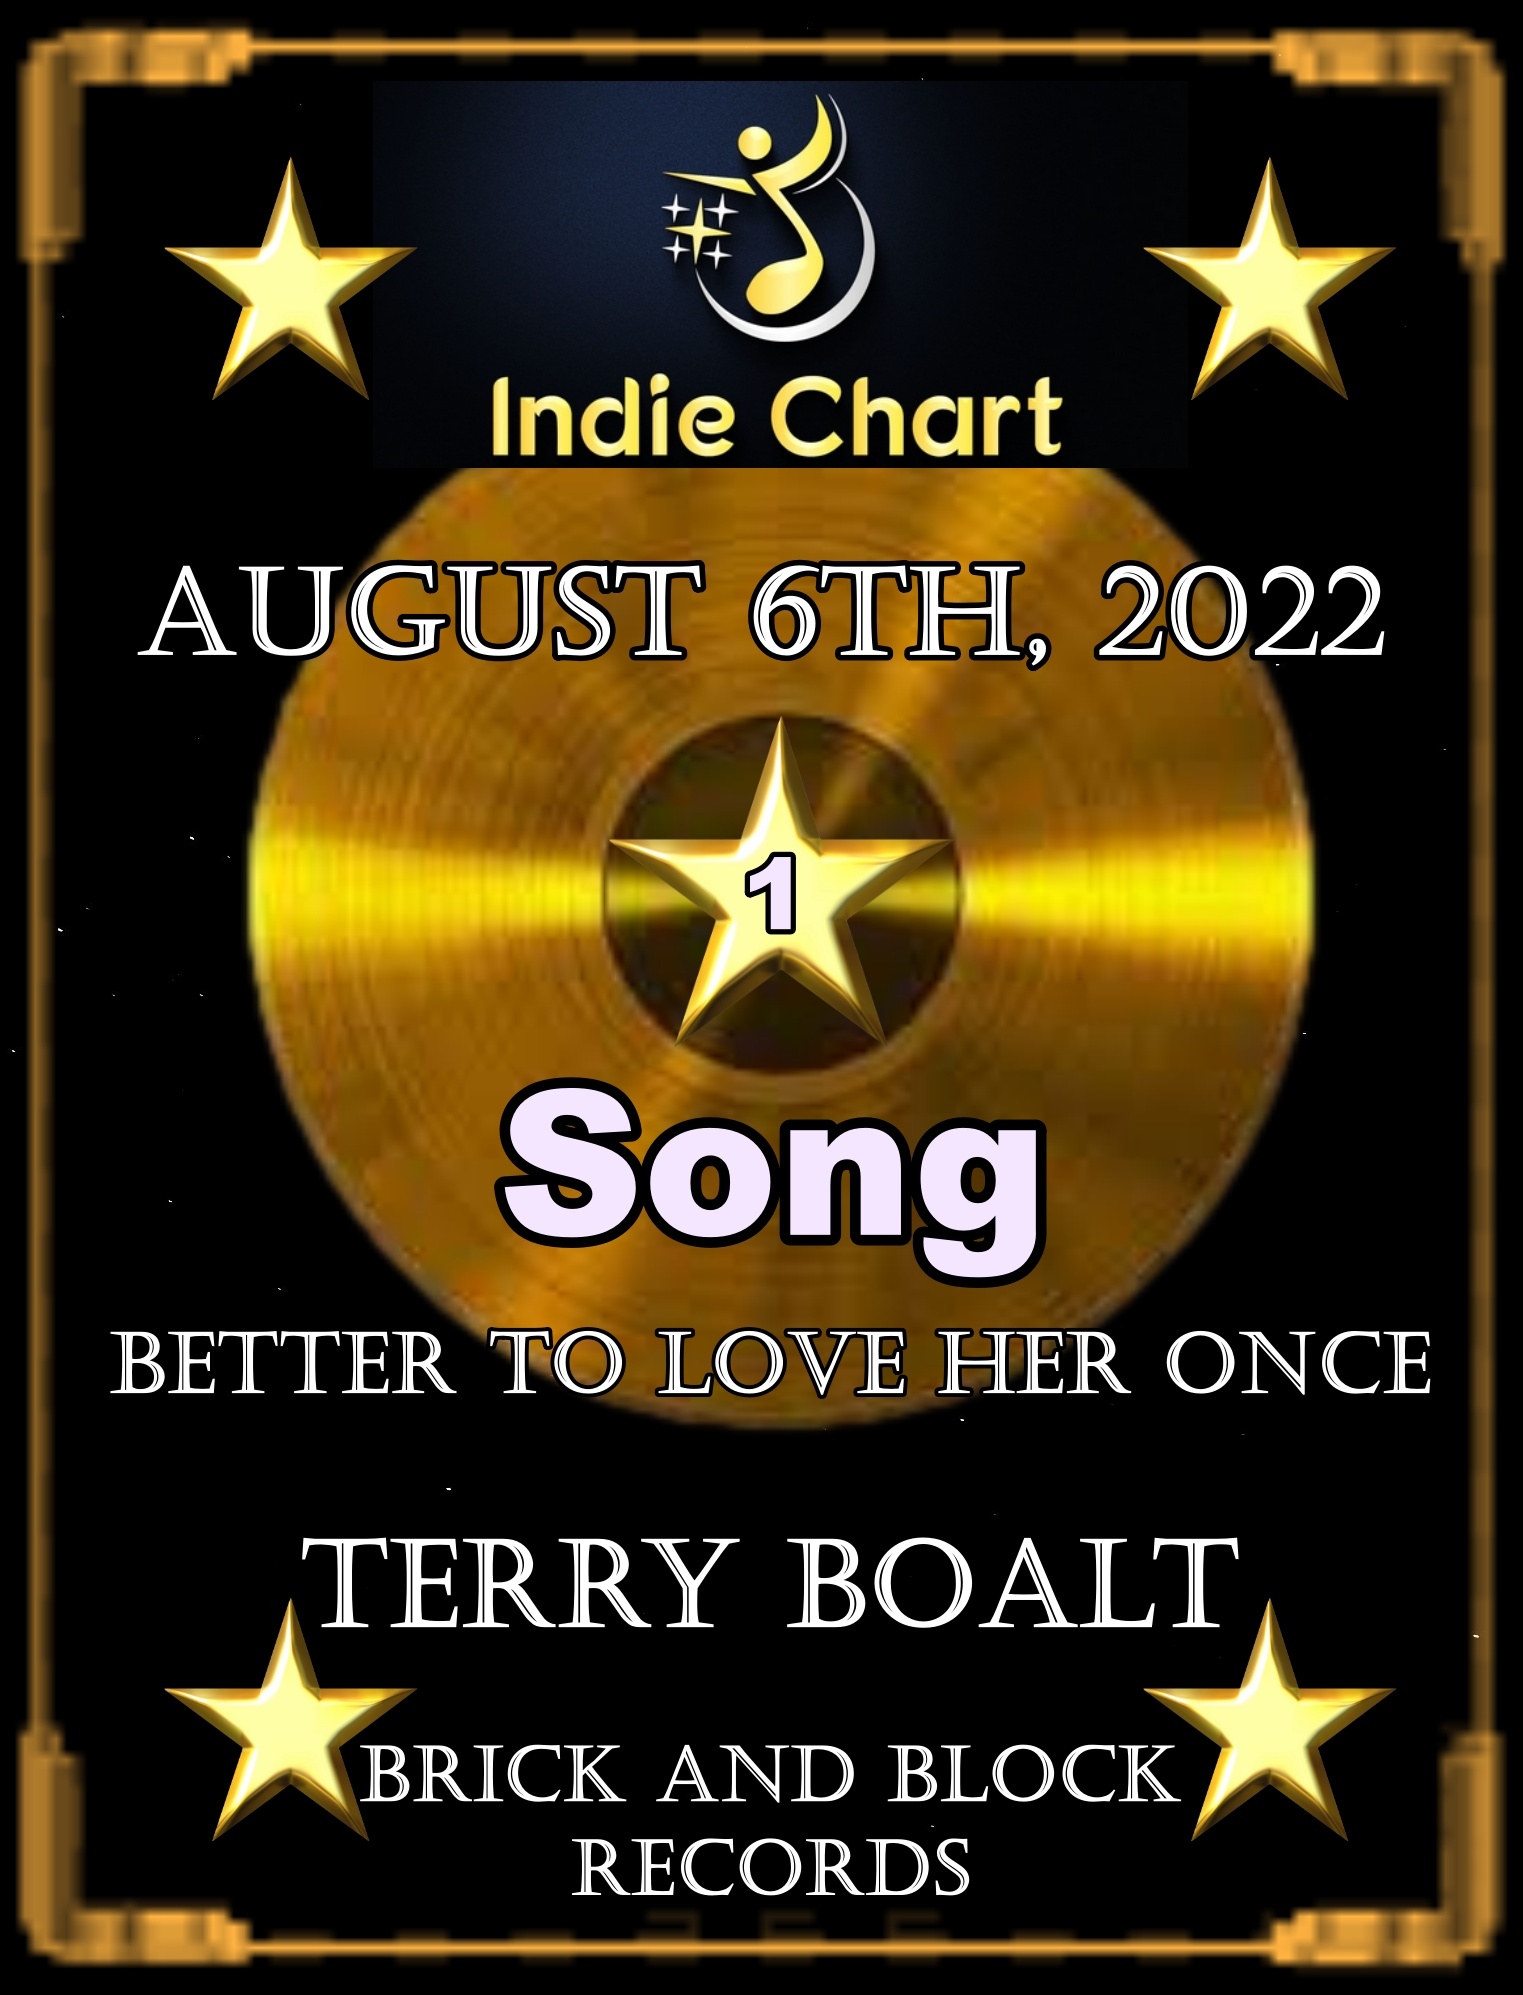 Better Tp Love Her Once - #1 on the Indie Chart